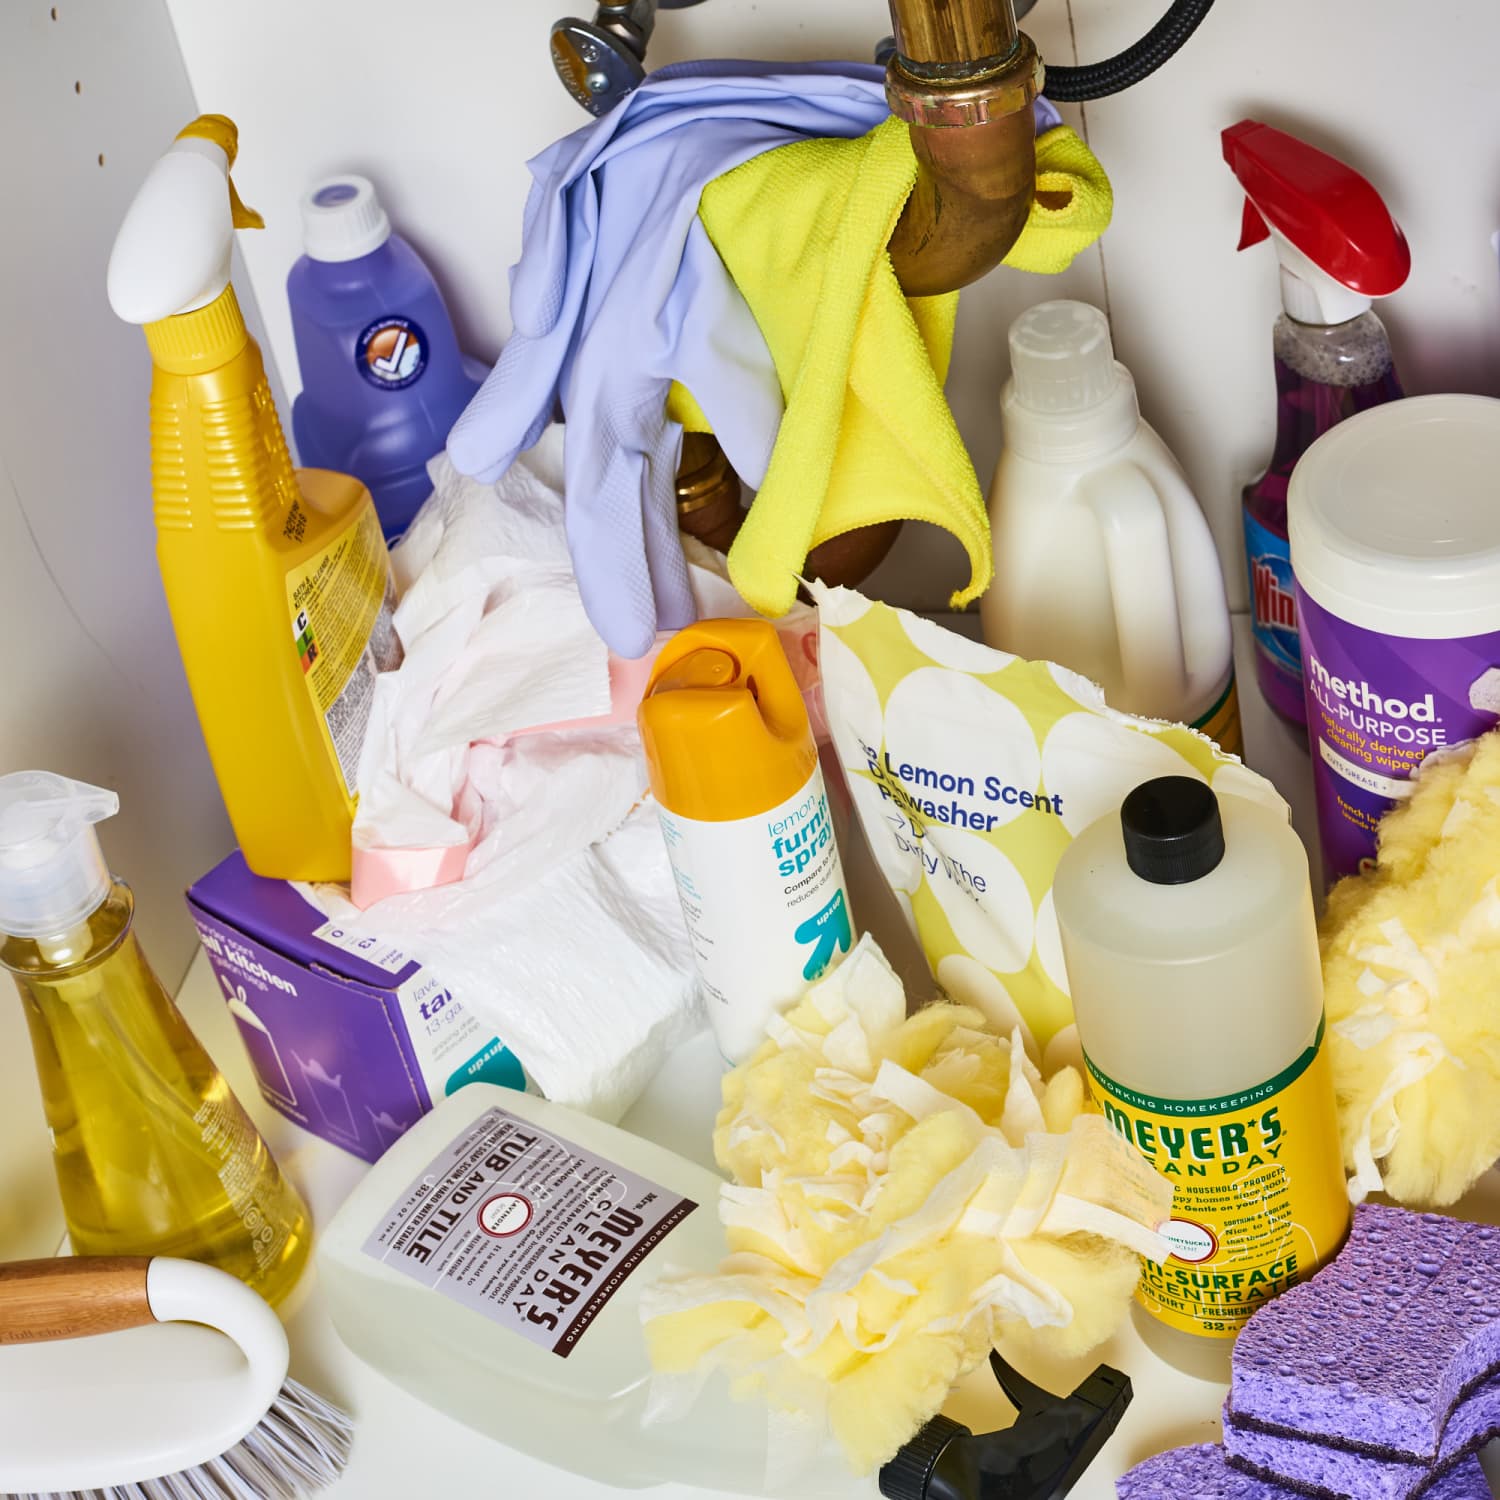 YouCopia $30 Under-Sink Cleaning Supplies Organizer Review